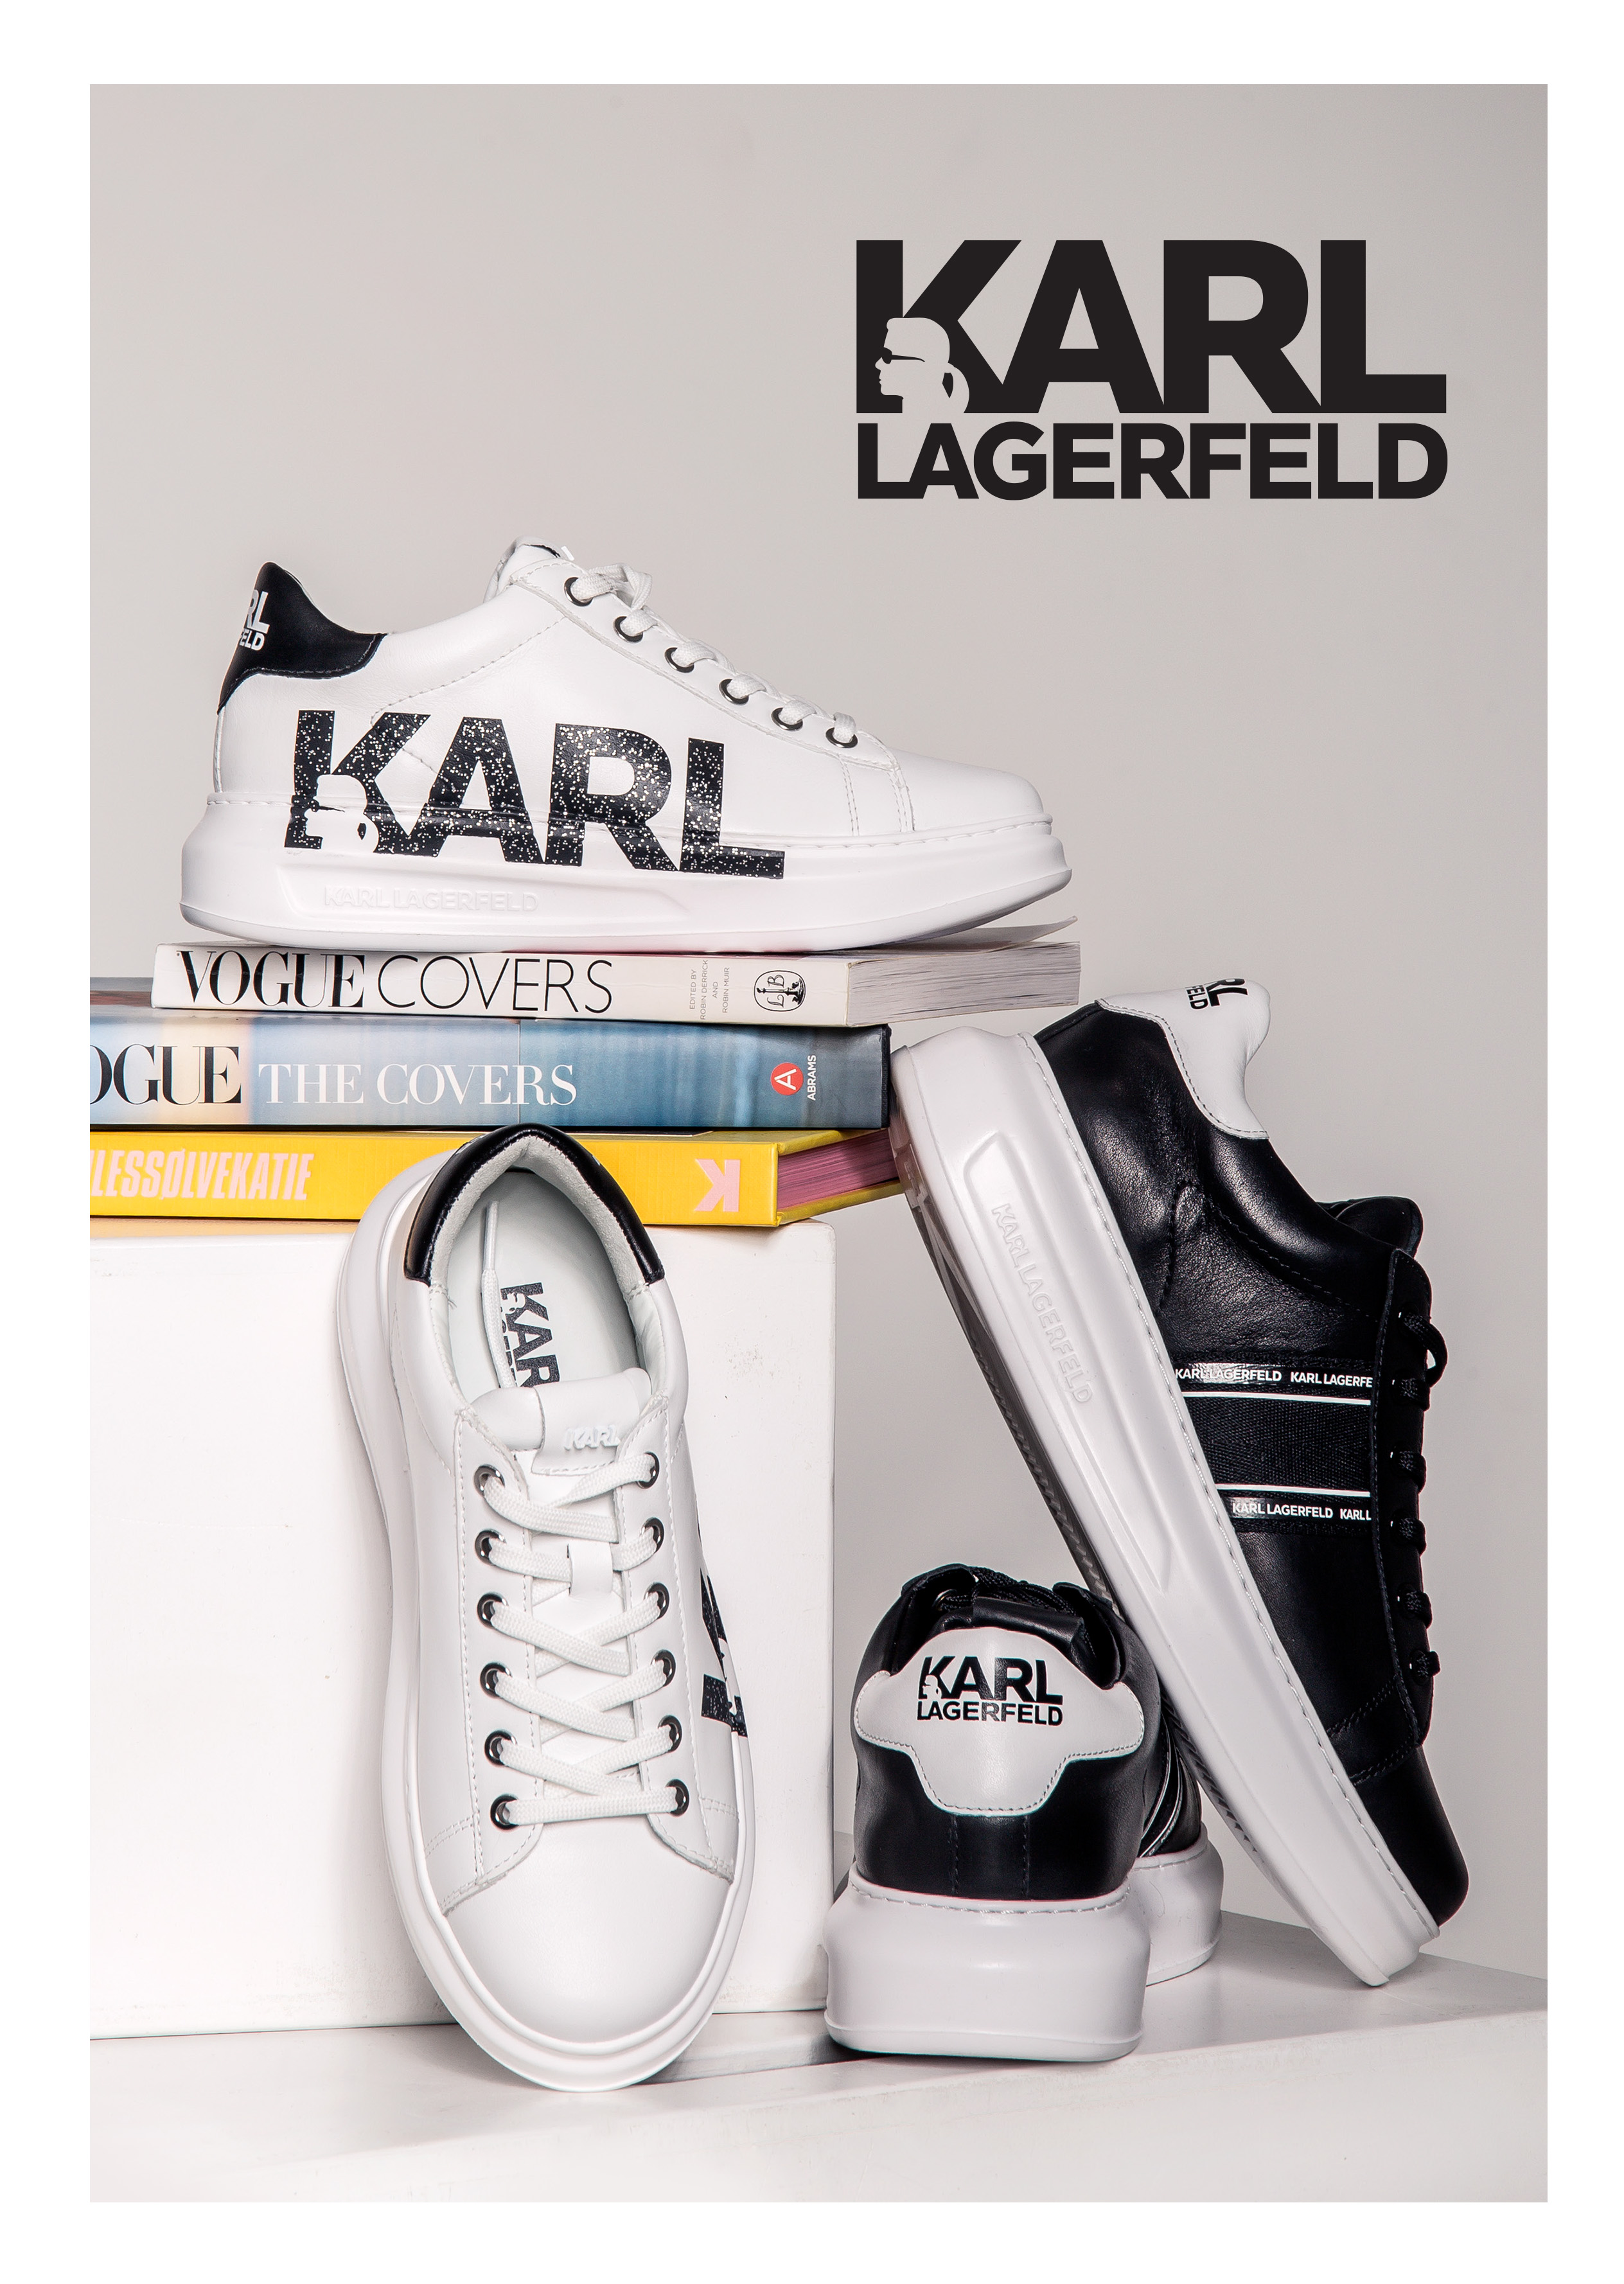 karl lagerfeld office shoes